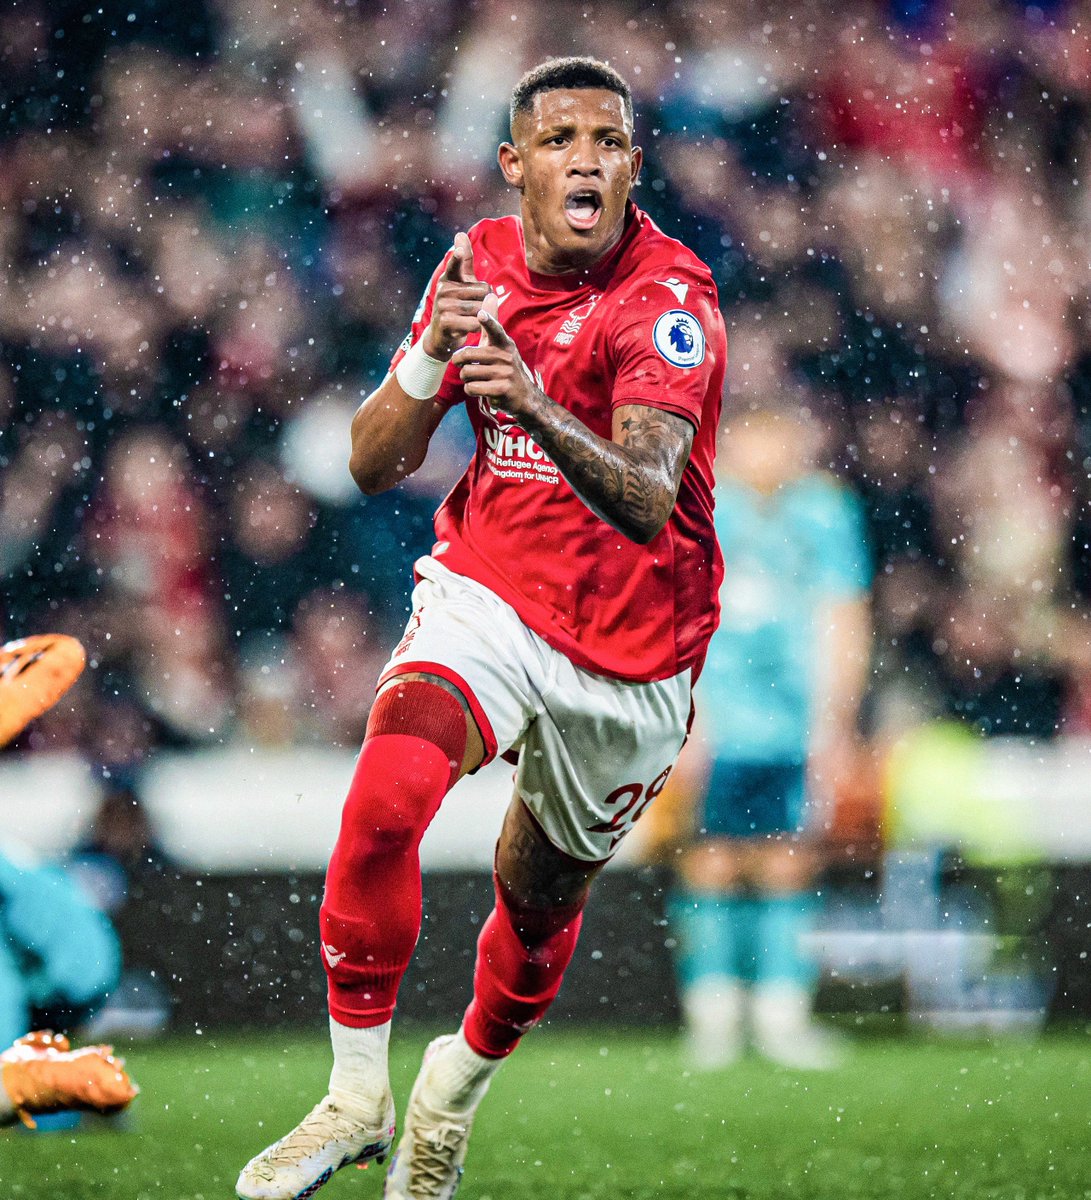 Danilo has impressed since his arrival at Nottingham Forest and a call-up to the Brazilian national team would be well deserved for him 🇧🇷🌟 #NFFC